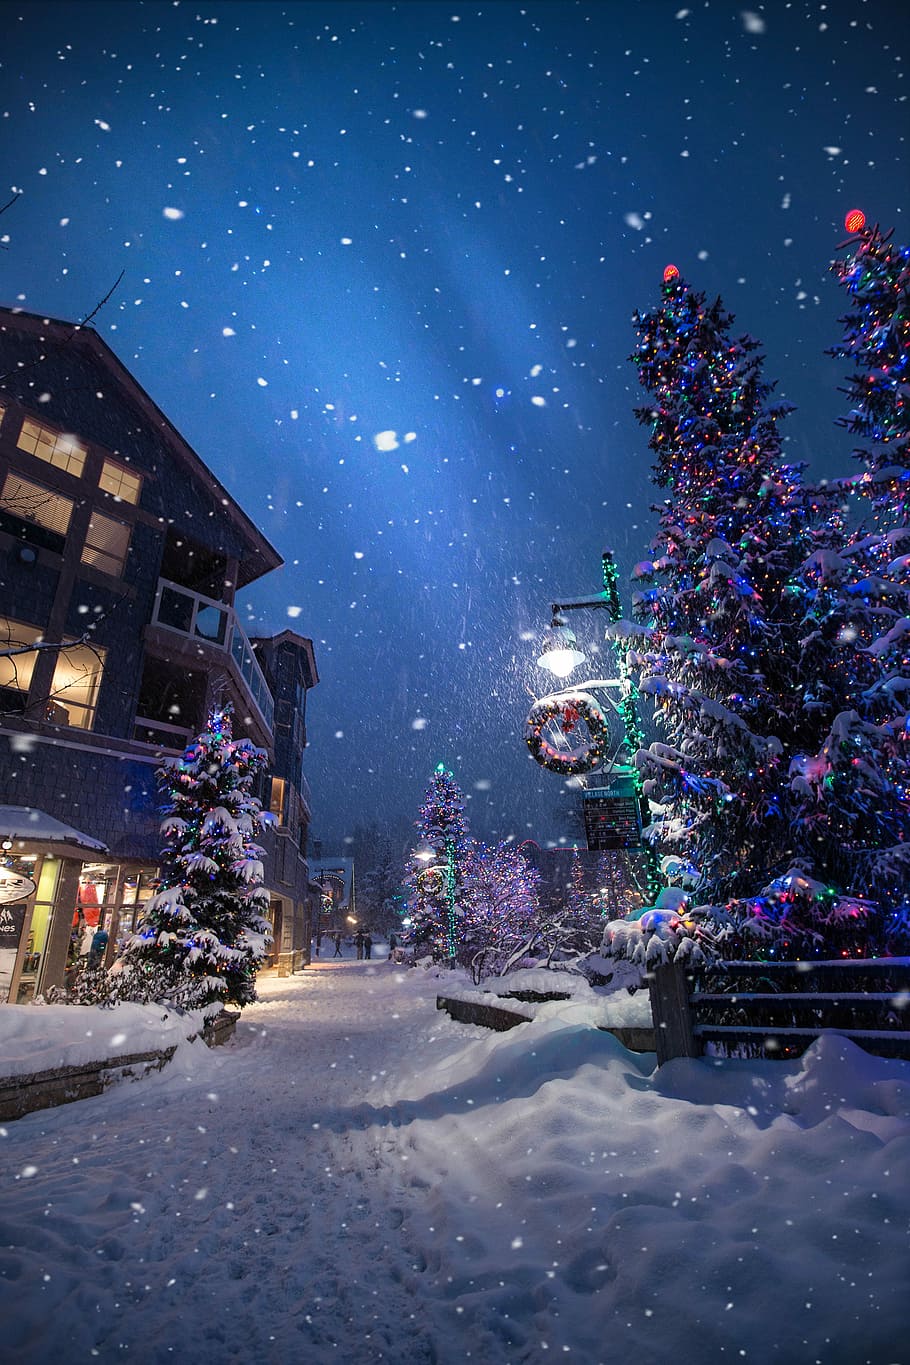 christmas village wallpaper, lighted house beside Christmas tree covered by snow